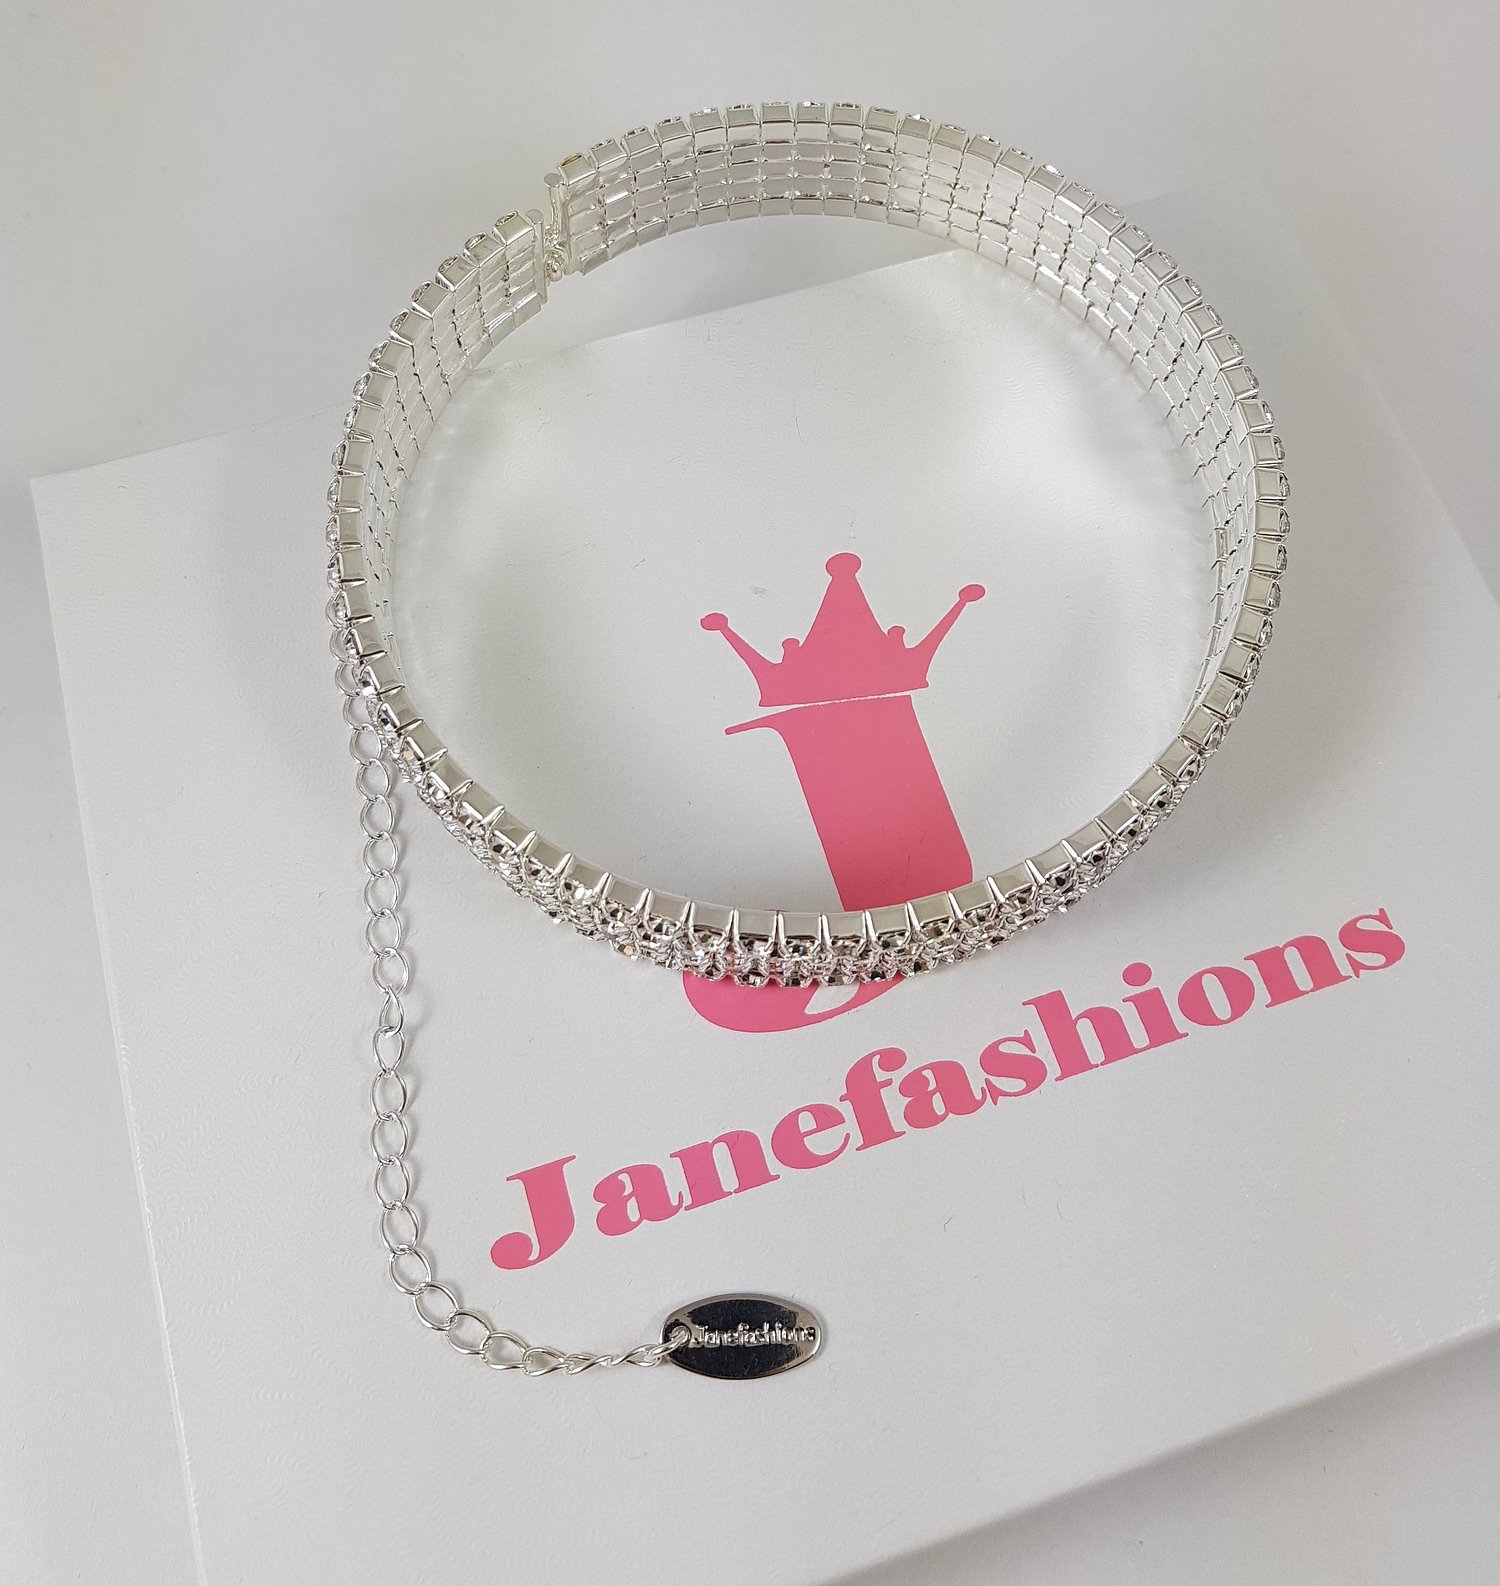 Janefashions 5-row Five Rows Clear White Black Pink Silver Austrian Rhinestone Crystal Choker Collar Necklace Dance Party Jewelry Wedding Prom N060